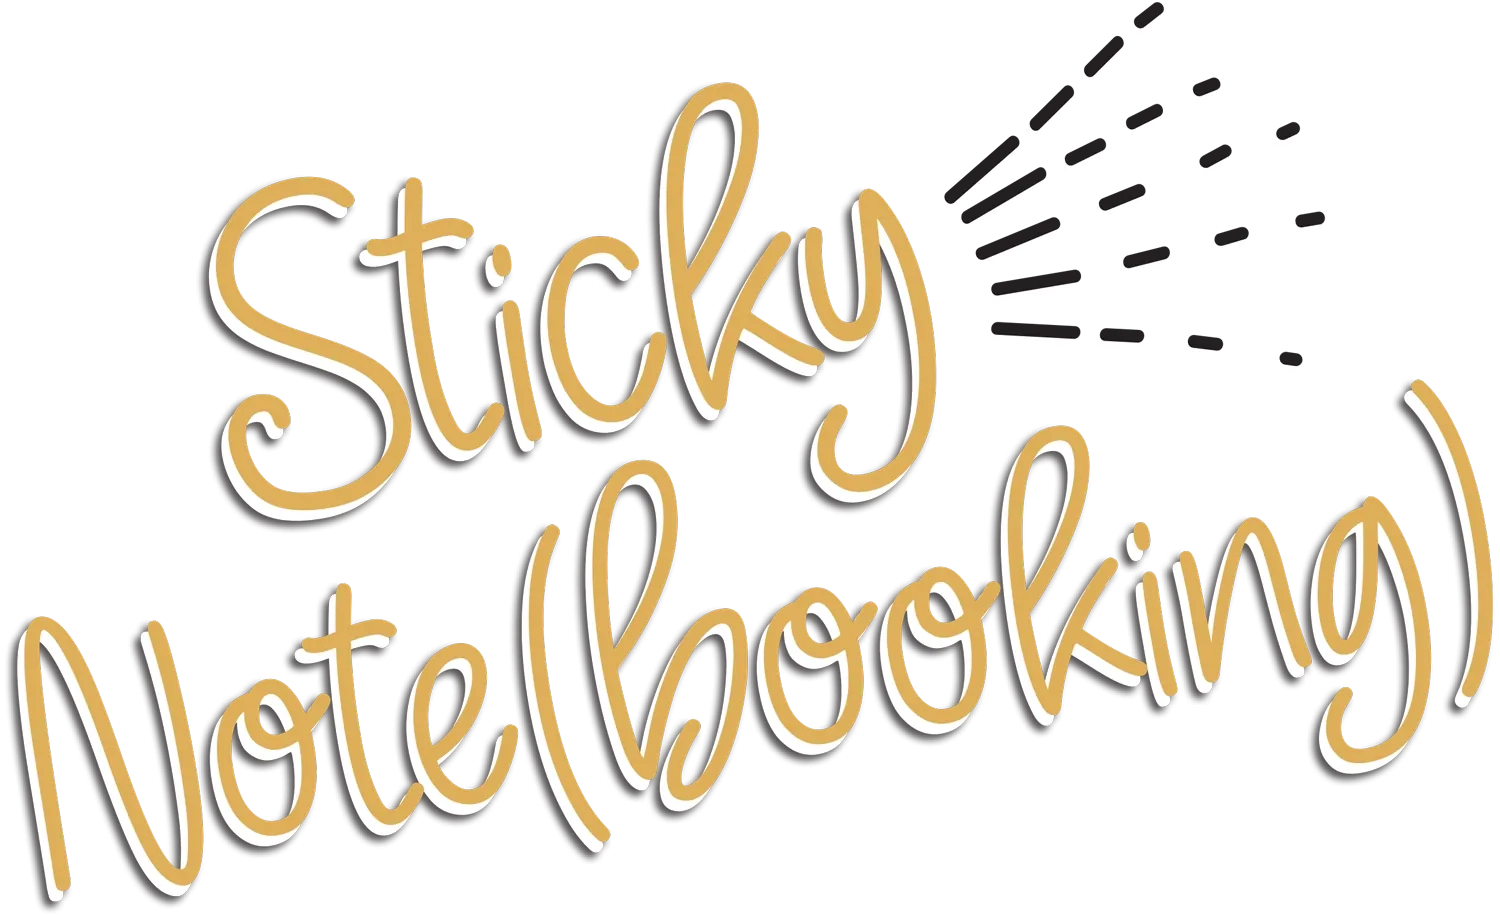 Sticky Note(booking) typography